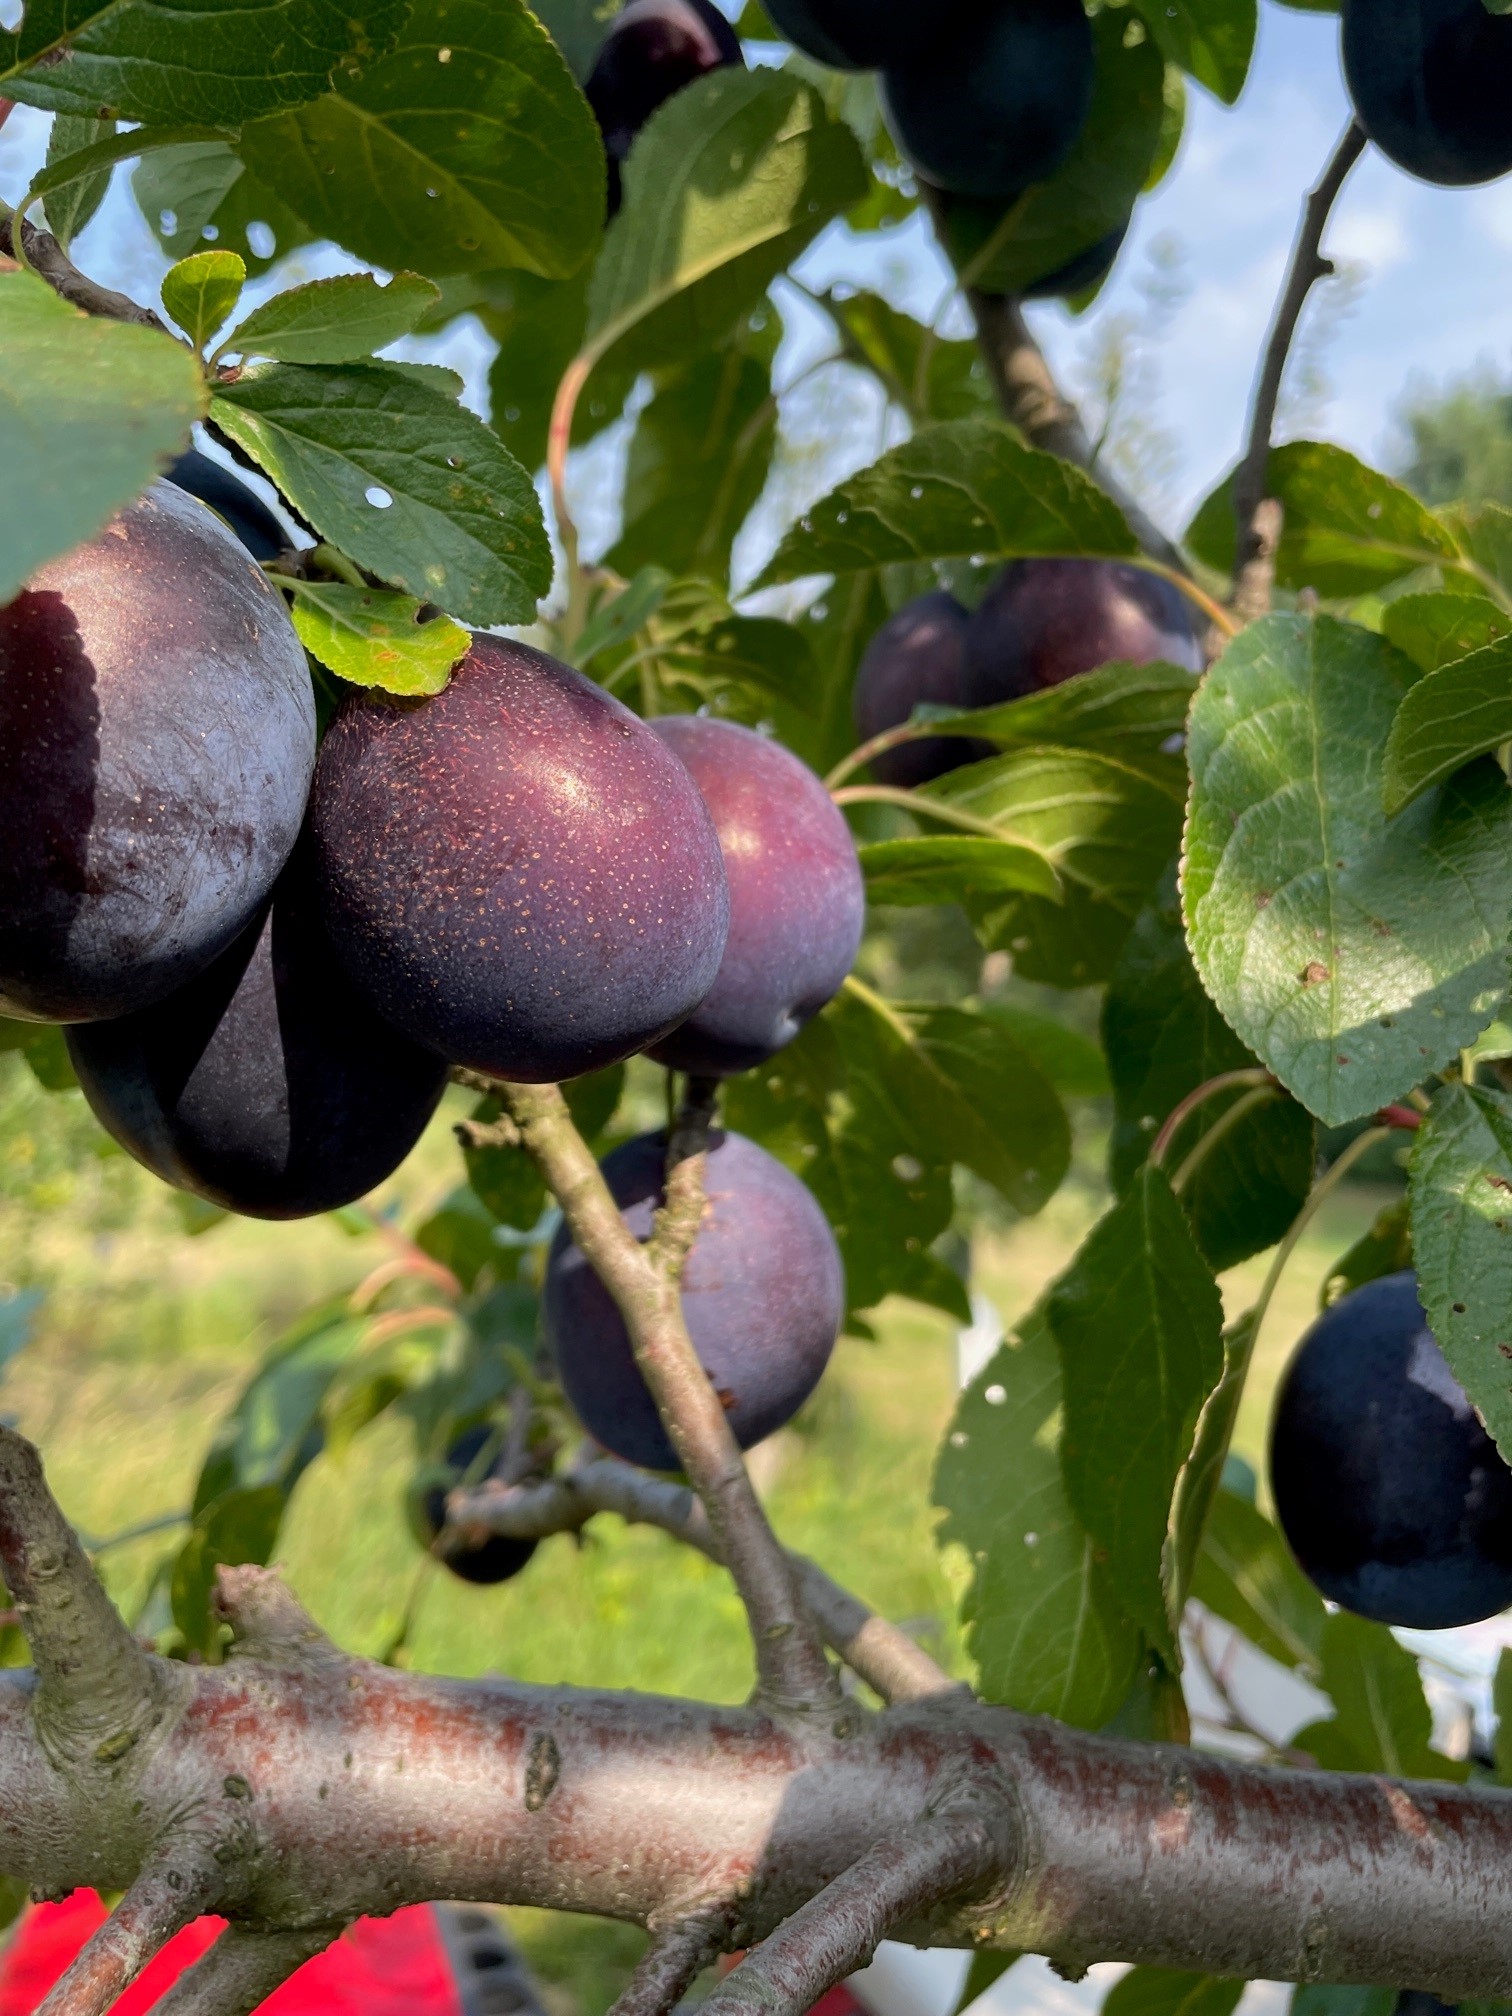 Castleton European plums hanging from a branch.